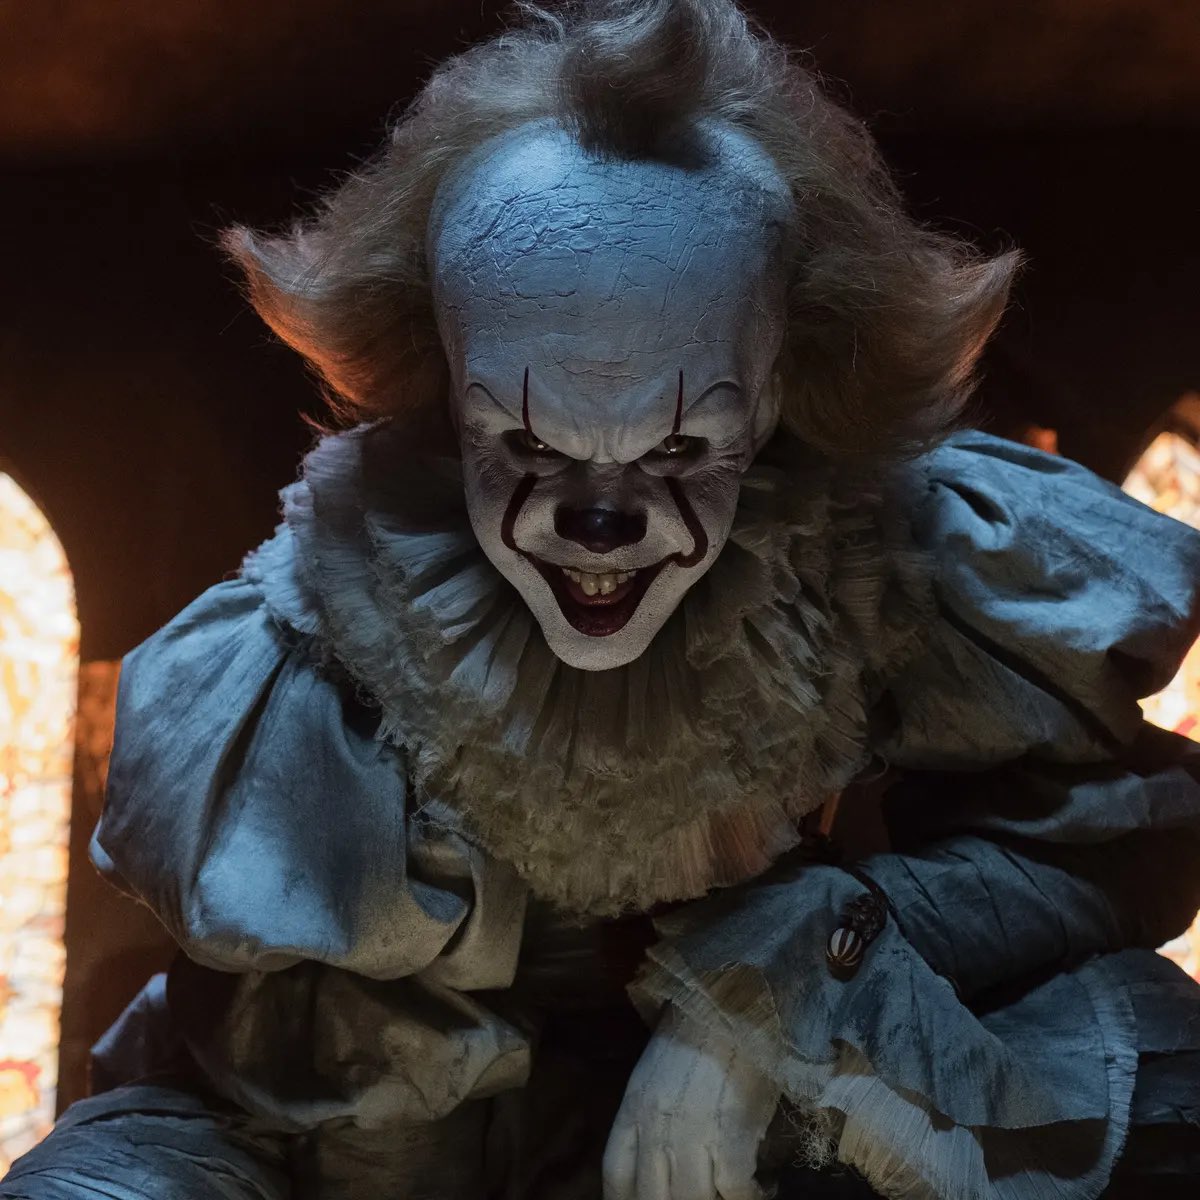 Bill Skarsgård will officially return as Pennywise in the ‘IT’ prequel series ‘WELCOME TO DERRY’

Releasing on Max in 2025.